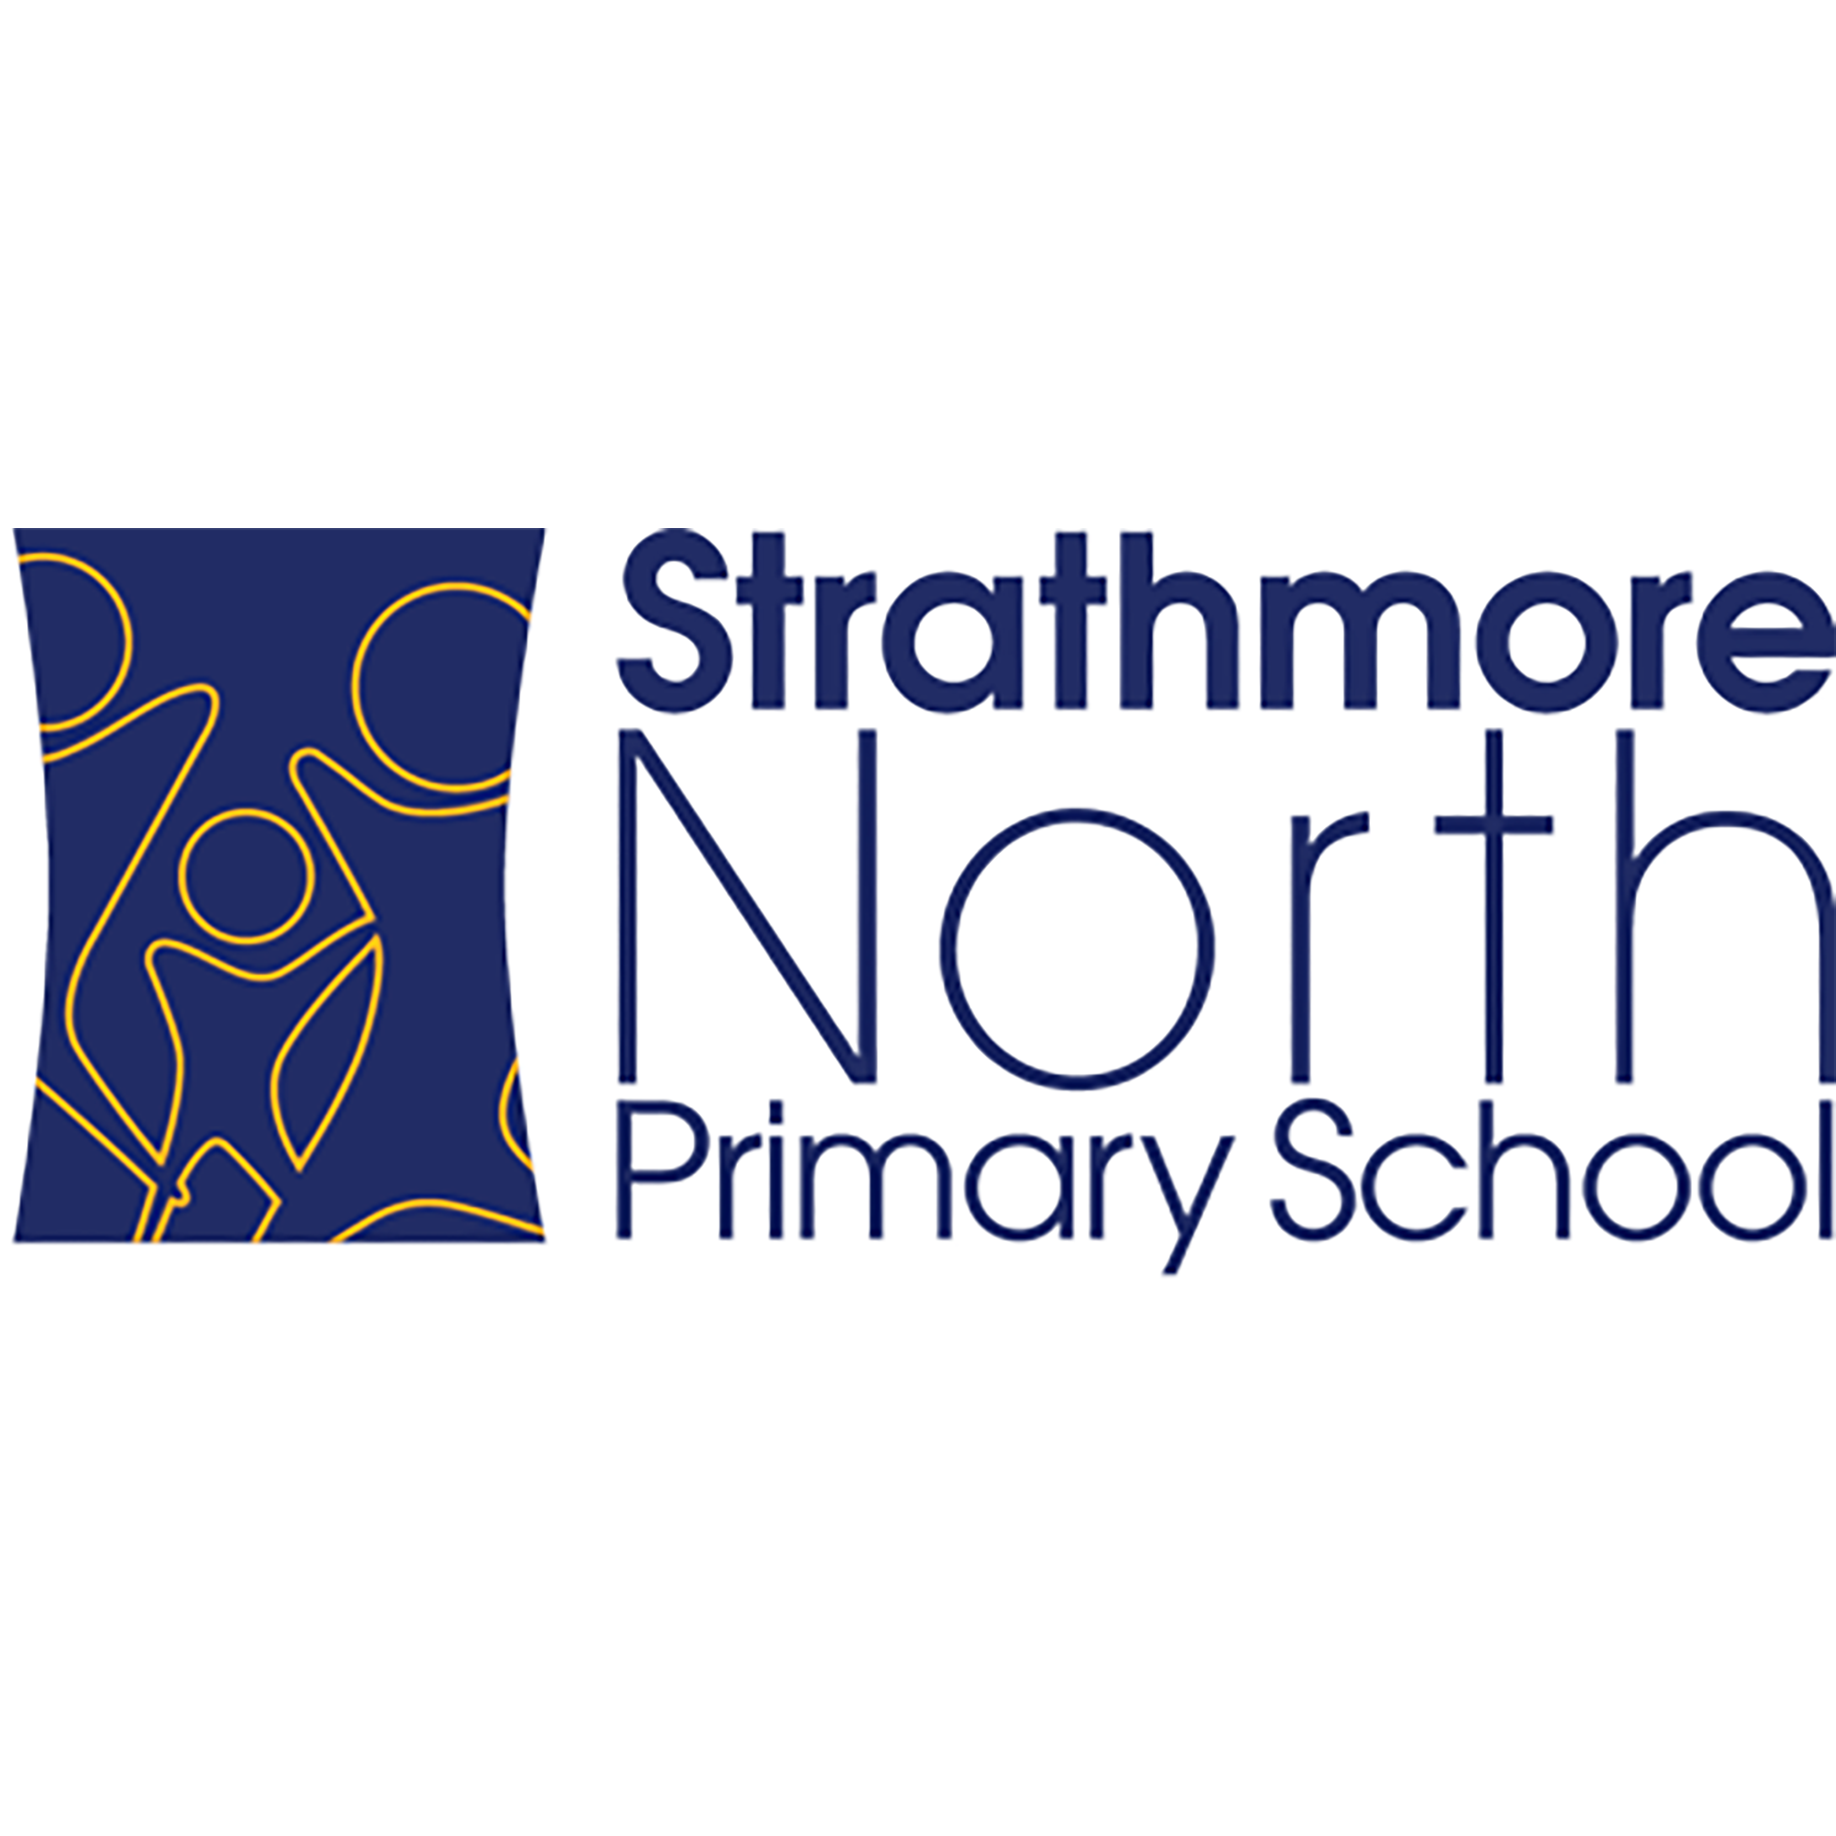 strathmore north primary school.png